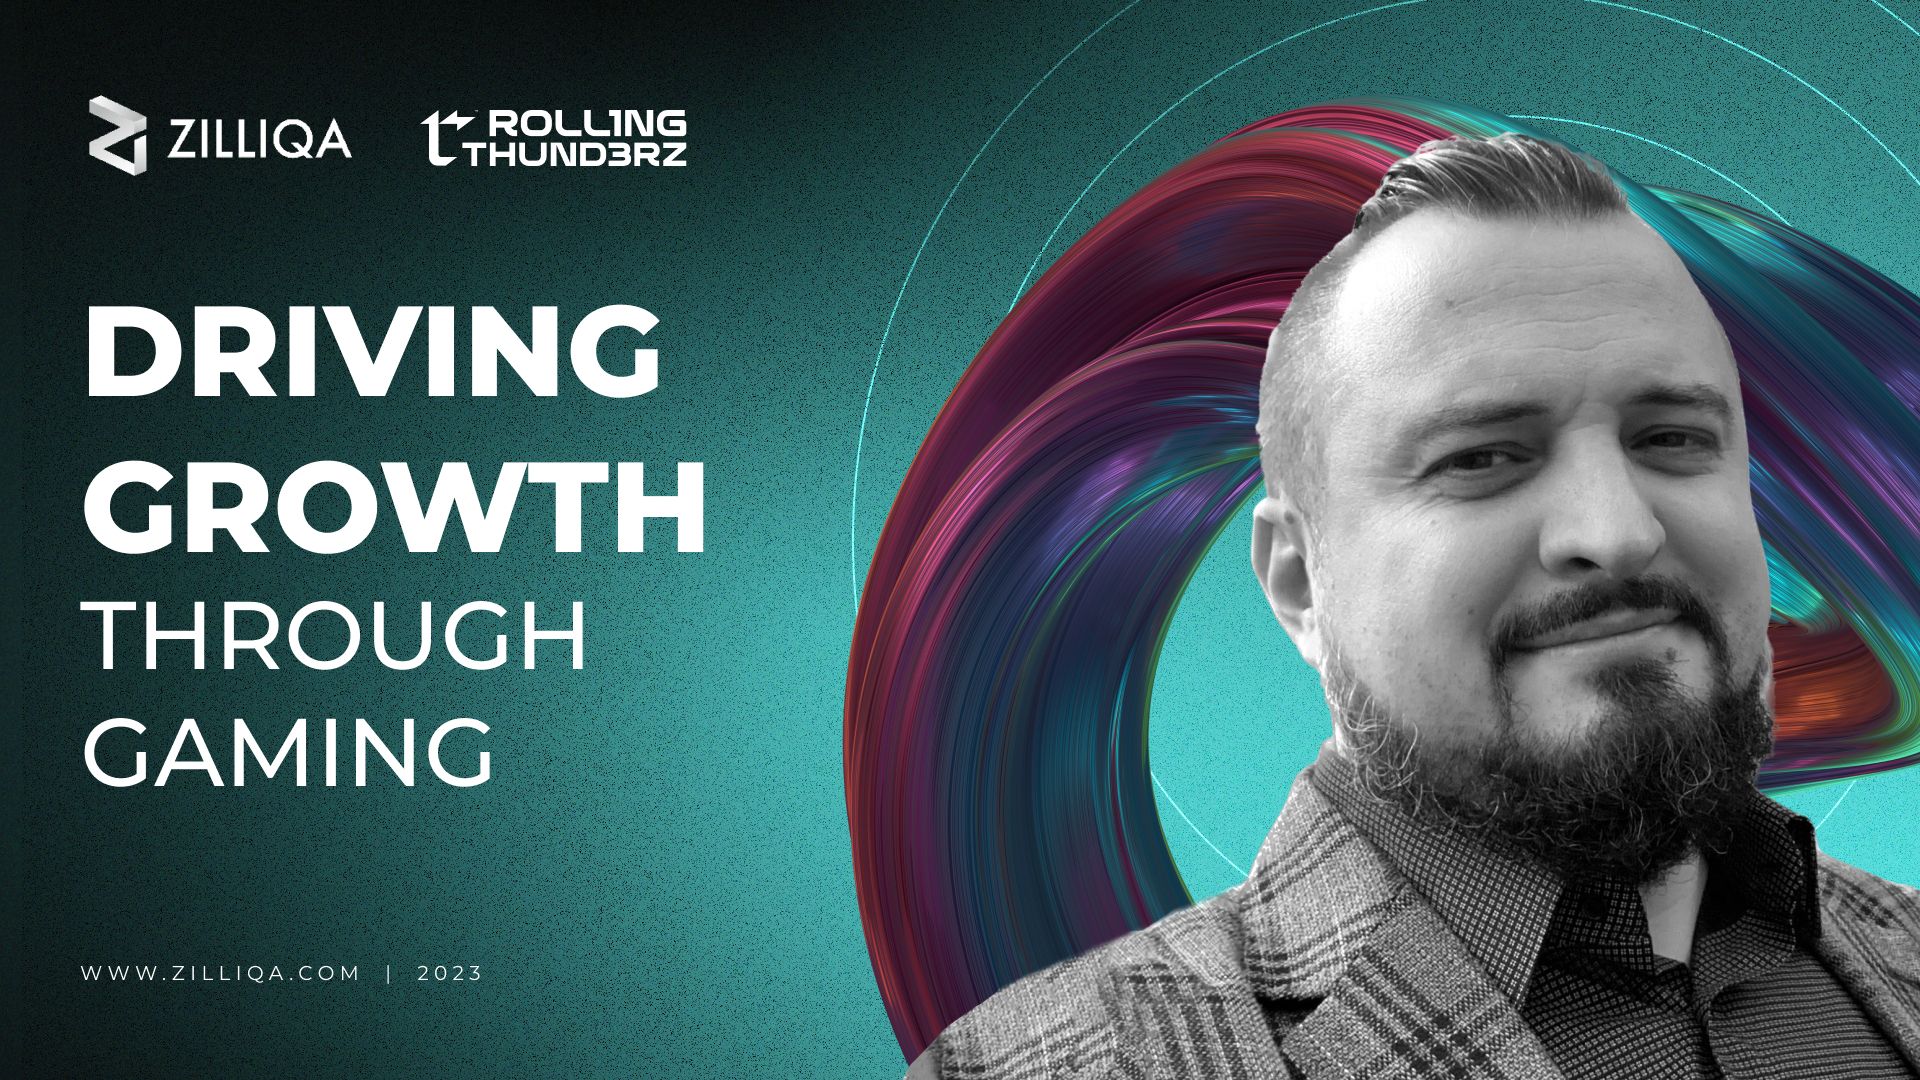 How Roll1ng Thund3rz will boost Zilliqa’s growth with a fresh take on gaming